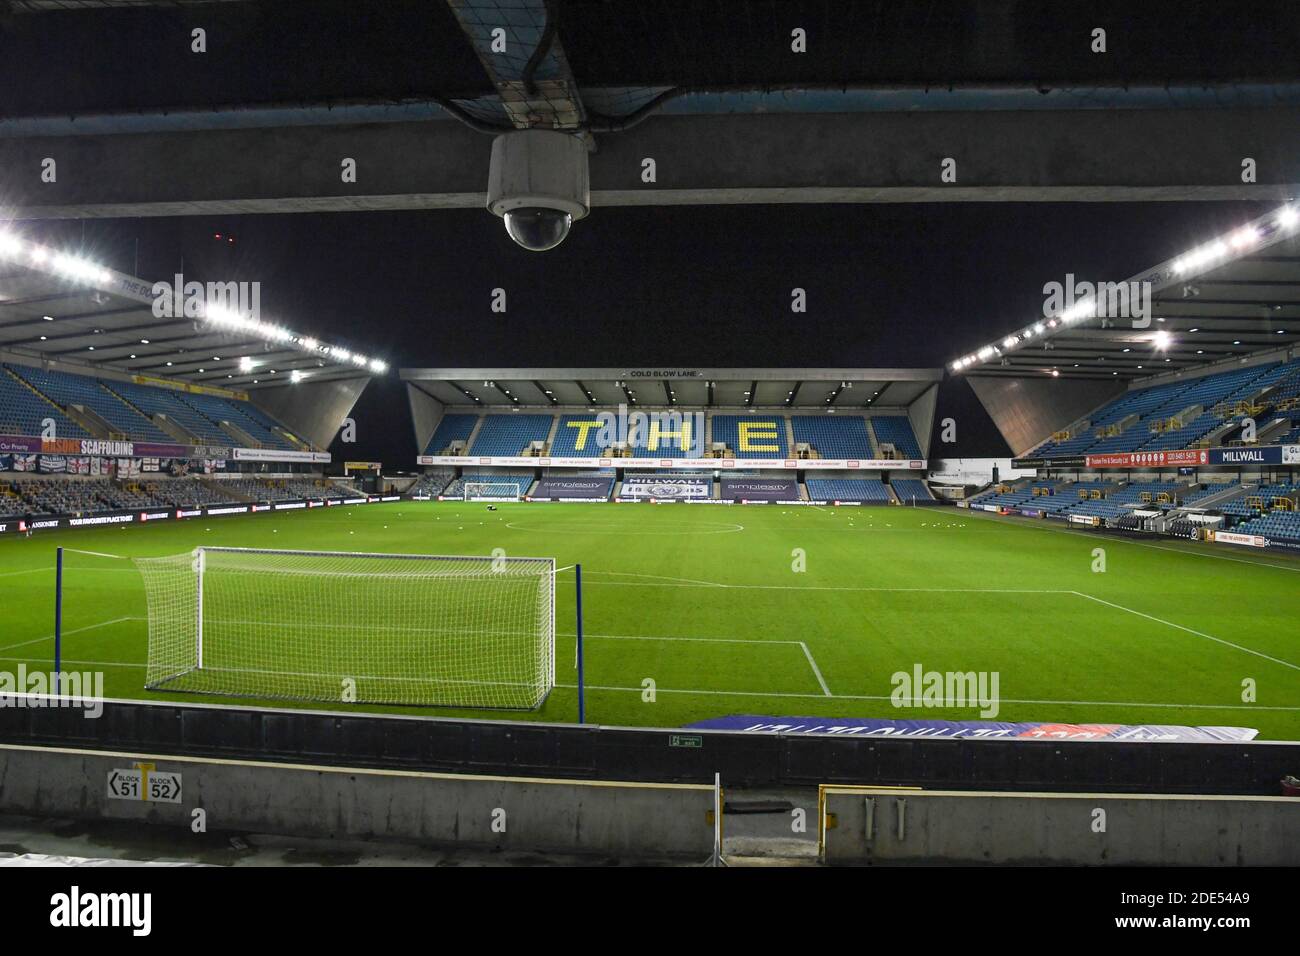 Millwall Overview